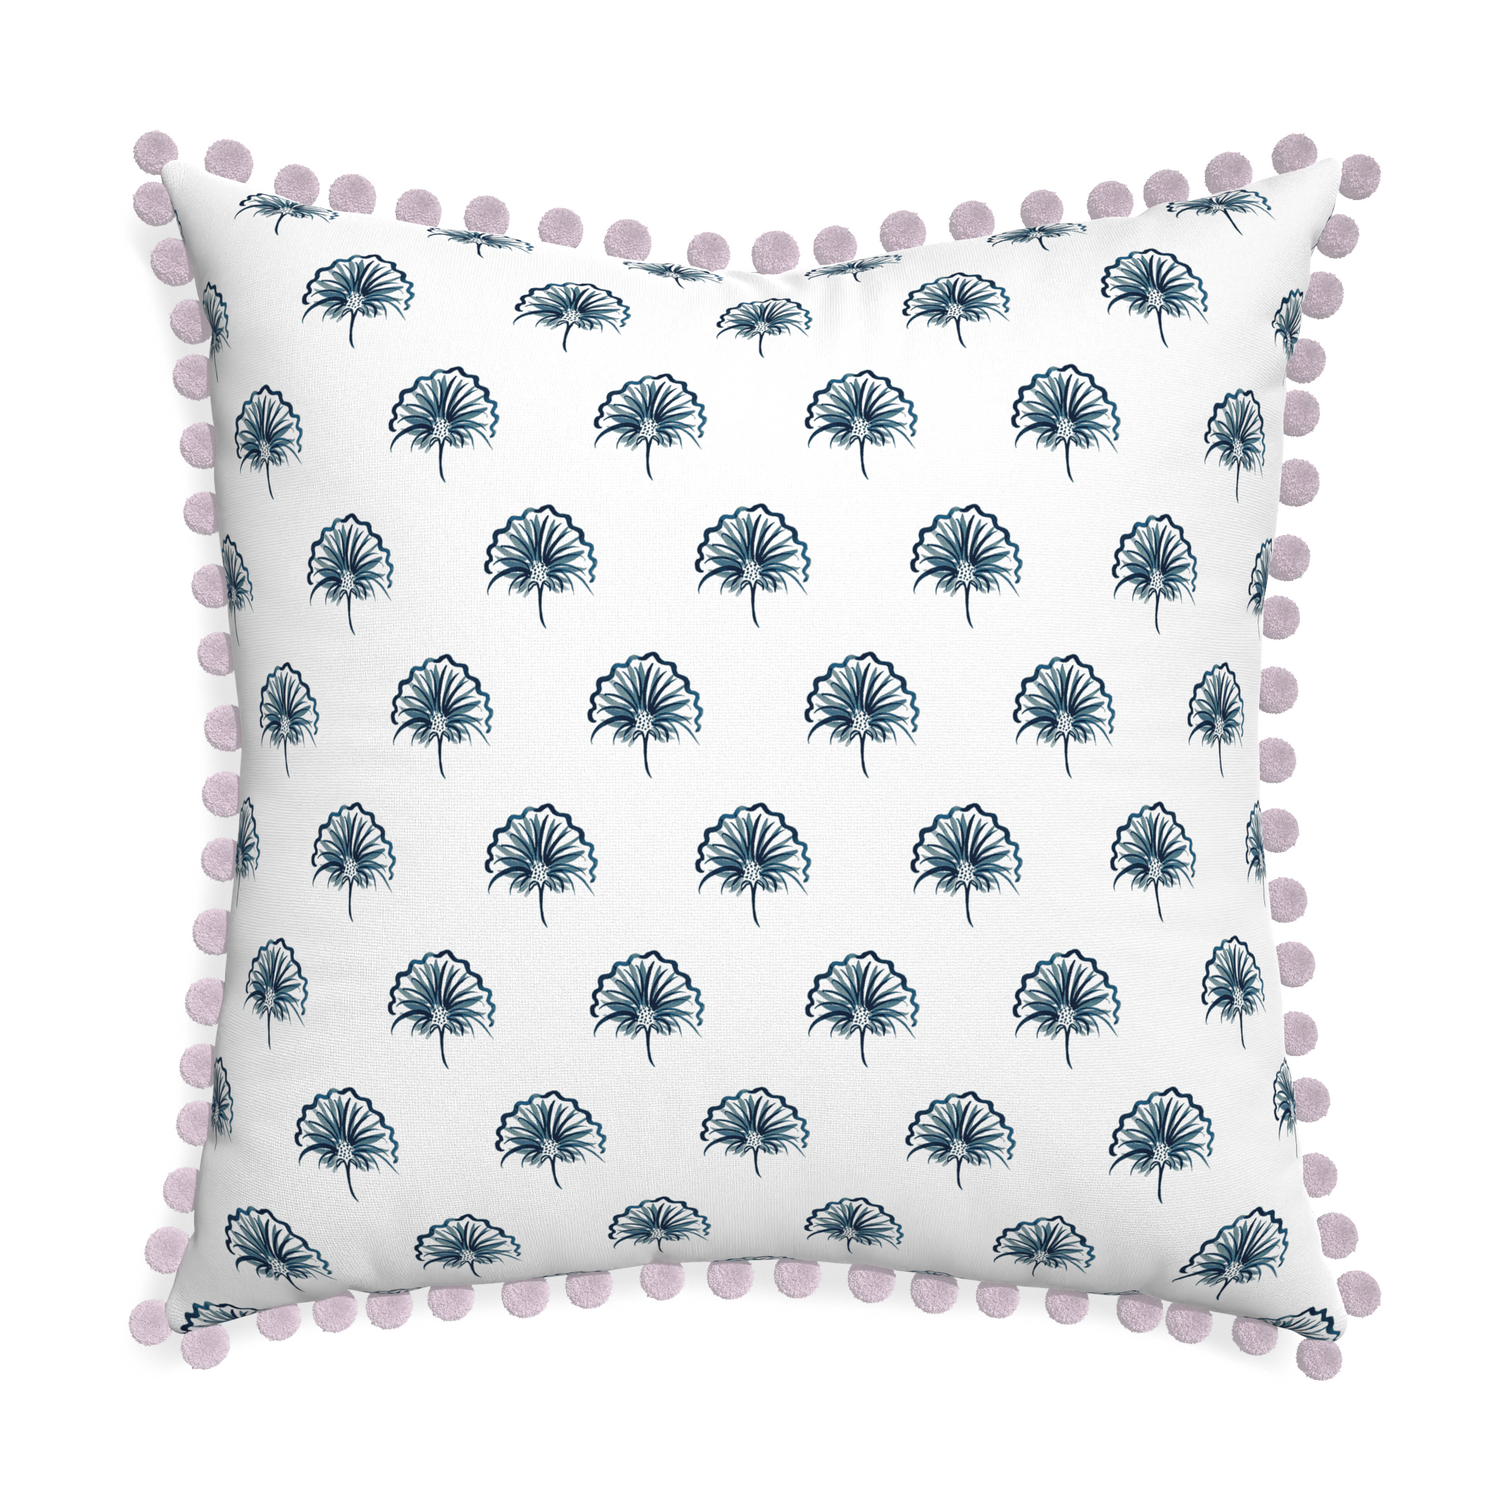 Euro-sham penelope midnight custom pillow with l on white background